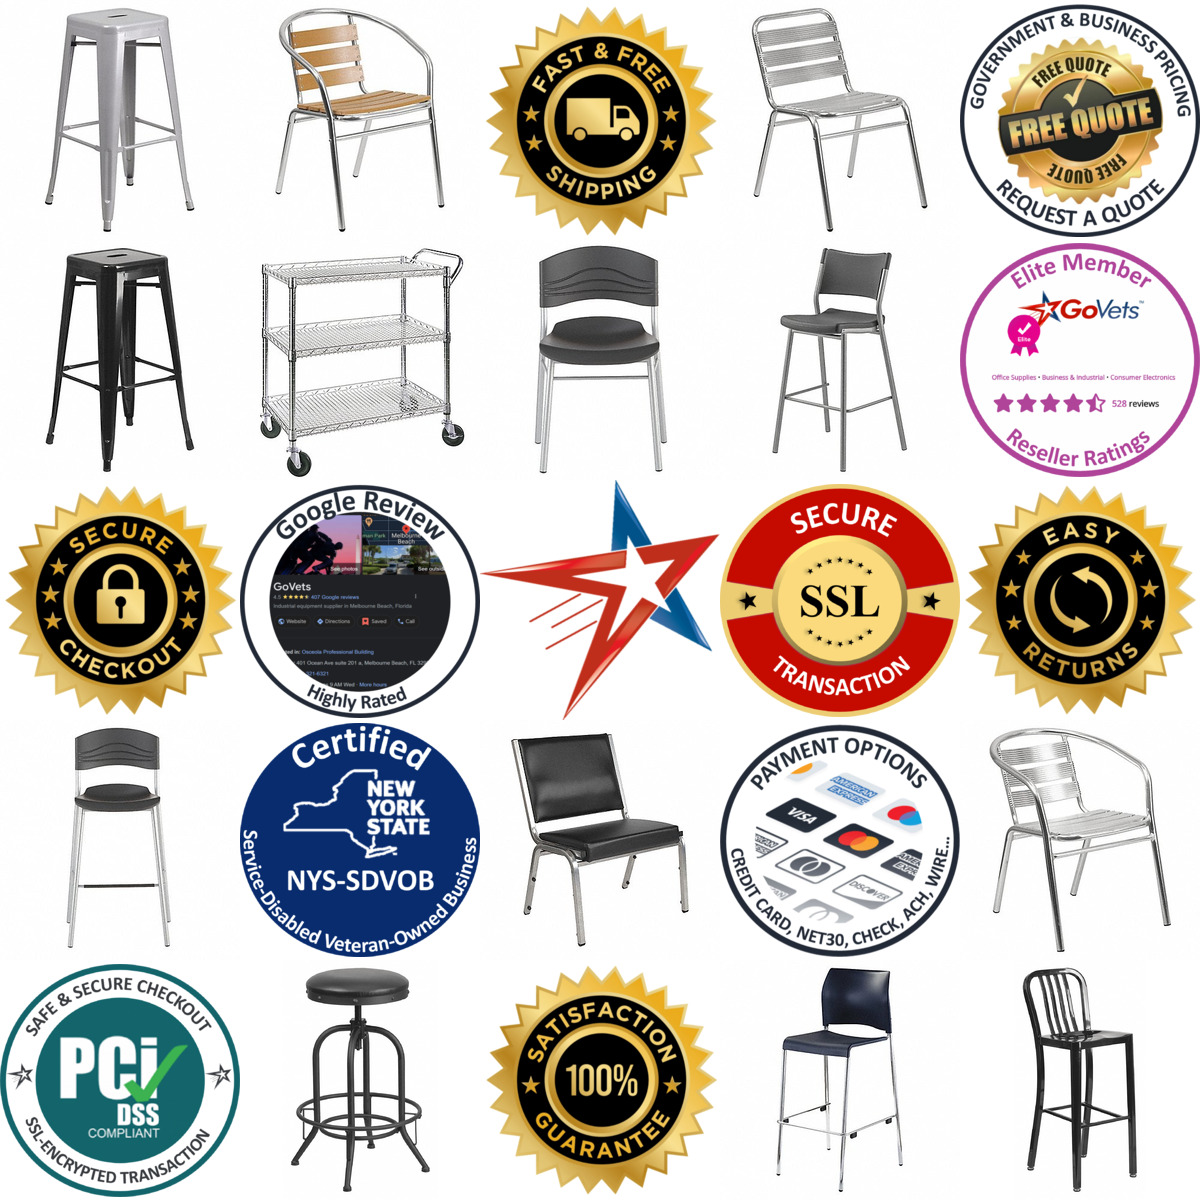 A selection of Cafe Chairs and Barstools products on GoVets